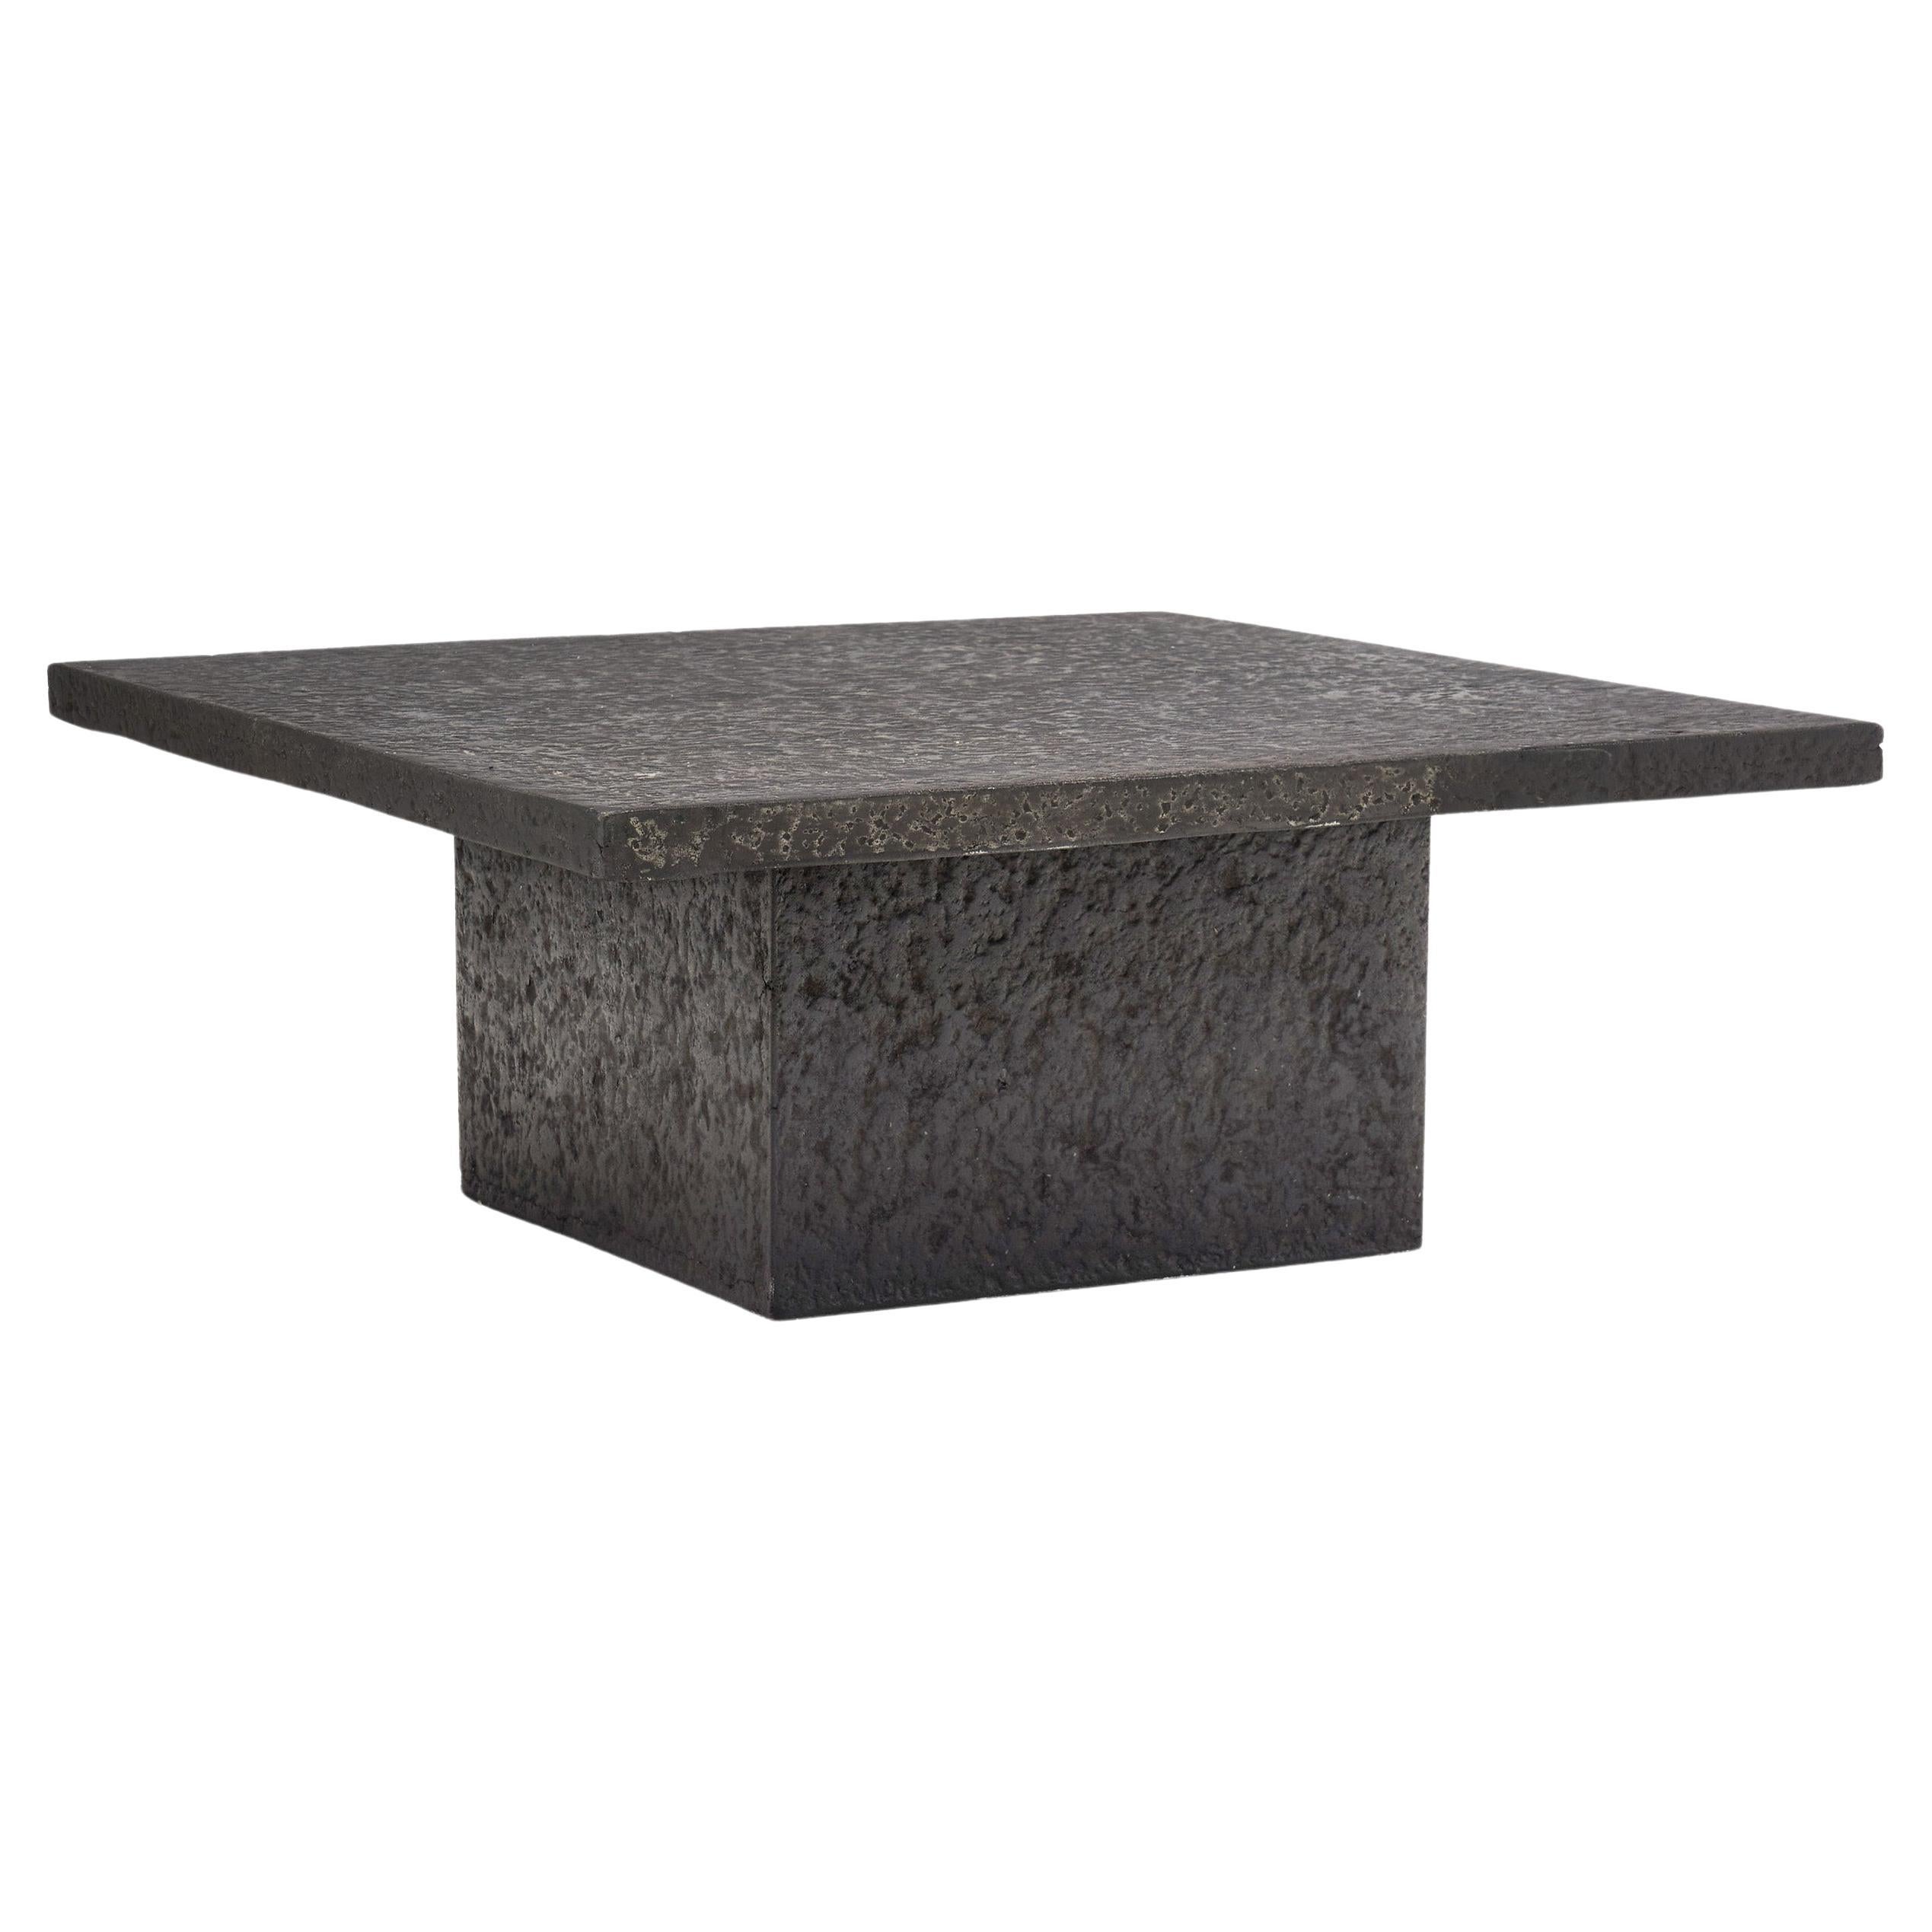 Brutalist Black Square Polychrome Coffee Table, Europe 20th Century